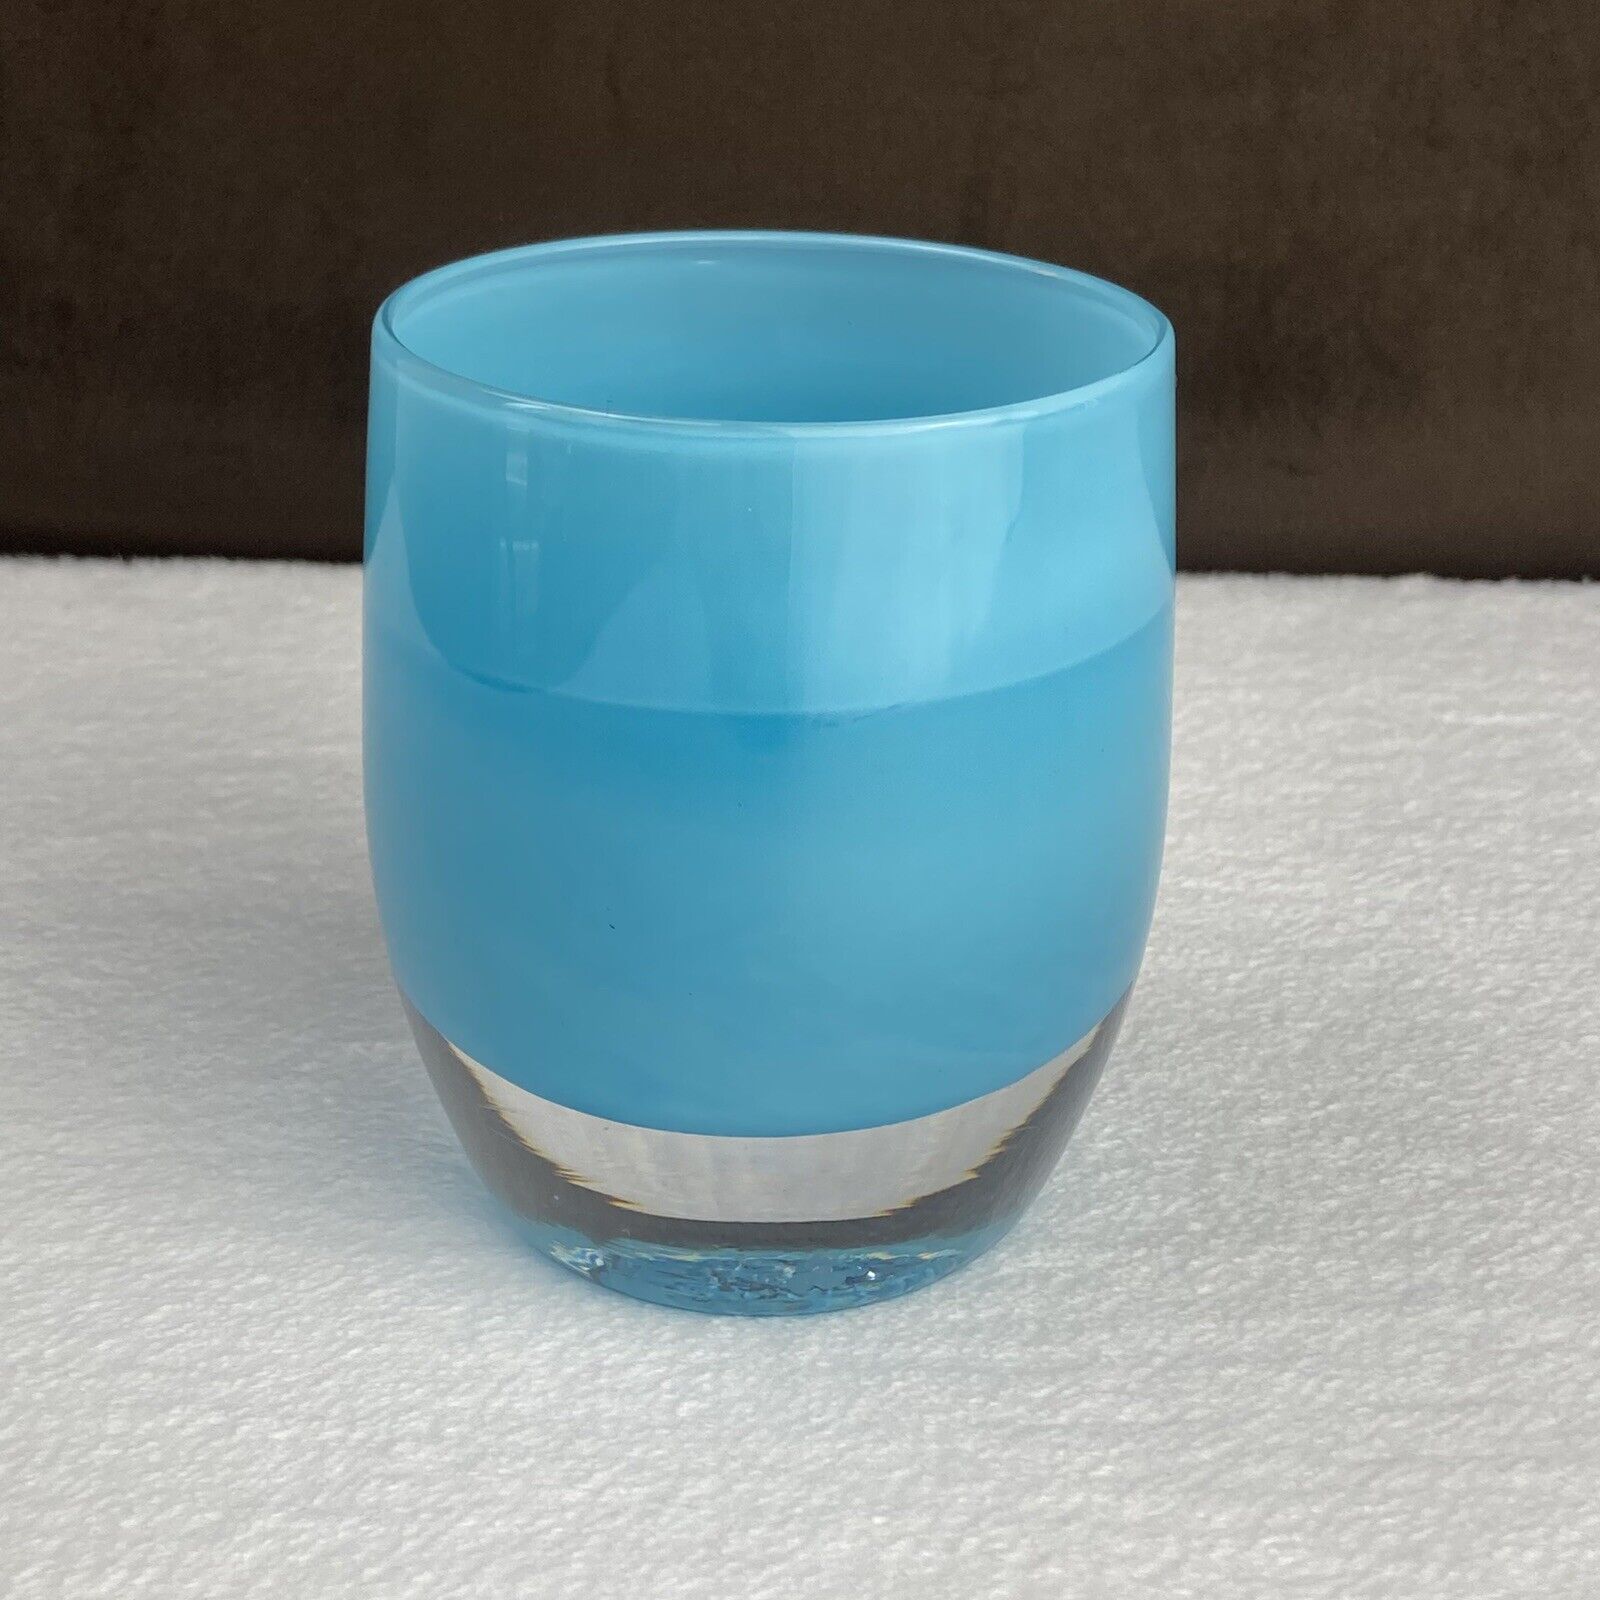 NEW w/ TAG GlassyBaby Mountain Lake #1203 Blue Art Glass Votive Candle Holder